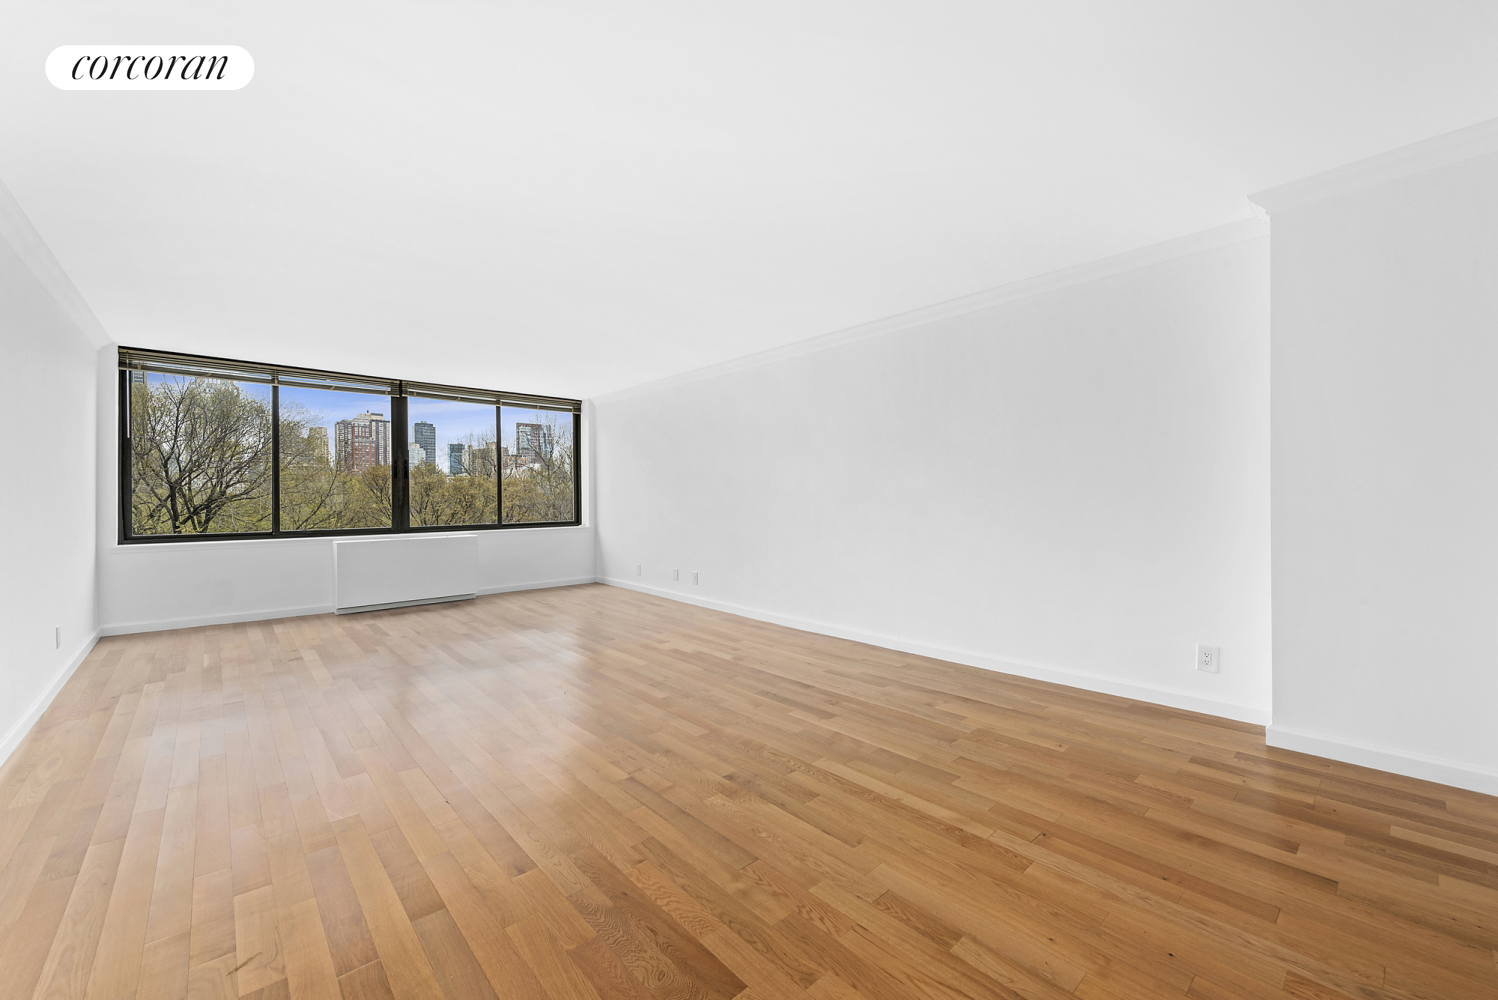 800 5th Avenue 9F, Lenox Hill, Upper East Side, NYC - 2 Bedrooms  
2.5 Bathrooms  
7 Rooms - 